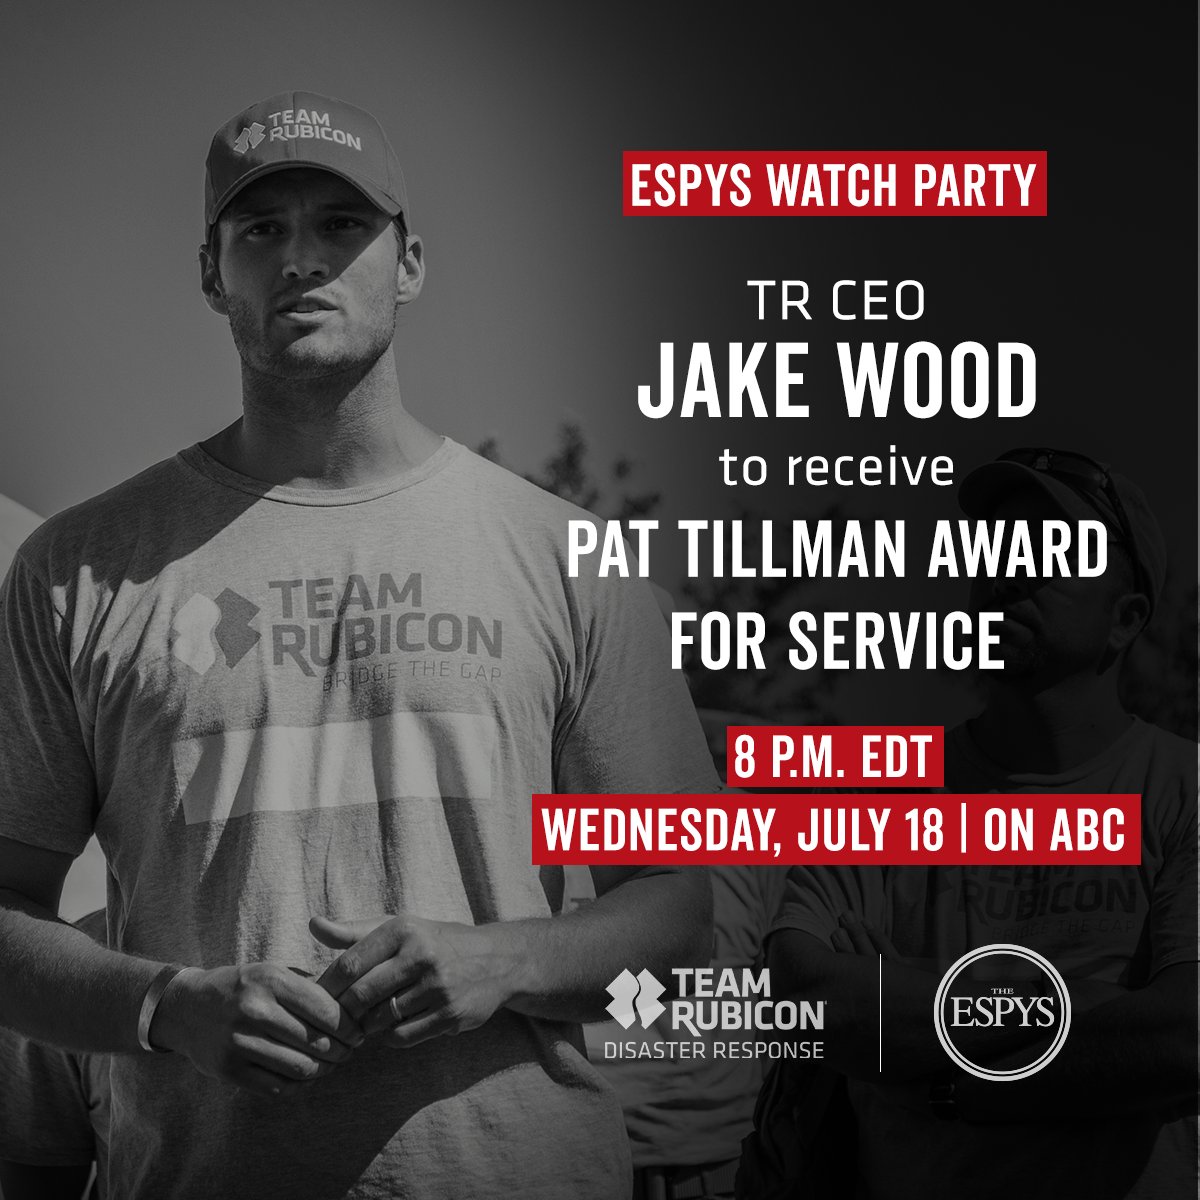 It's here! Tonight, the @ESPYS Pat Tillman Award will be awarded to Jake Wood, our co-founder and CEO. Learn more and don't forget to tune in: bit.ly/2O10xzR